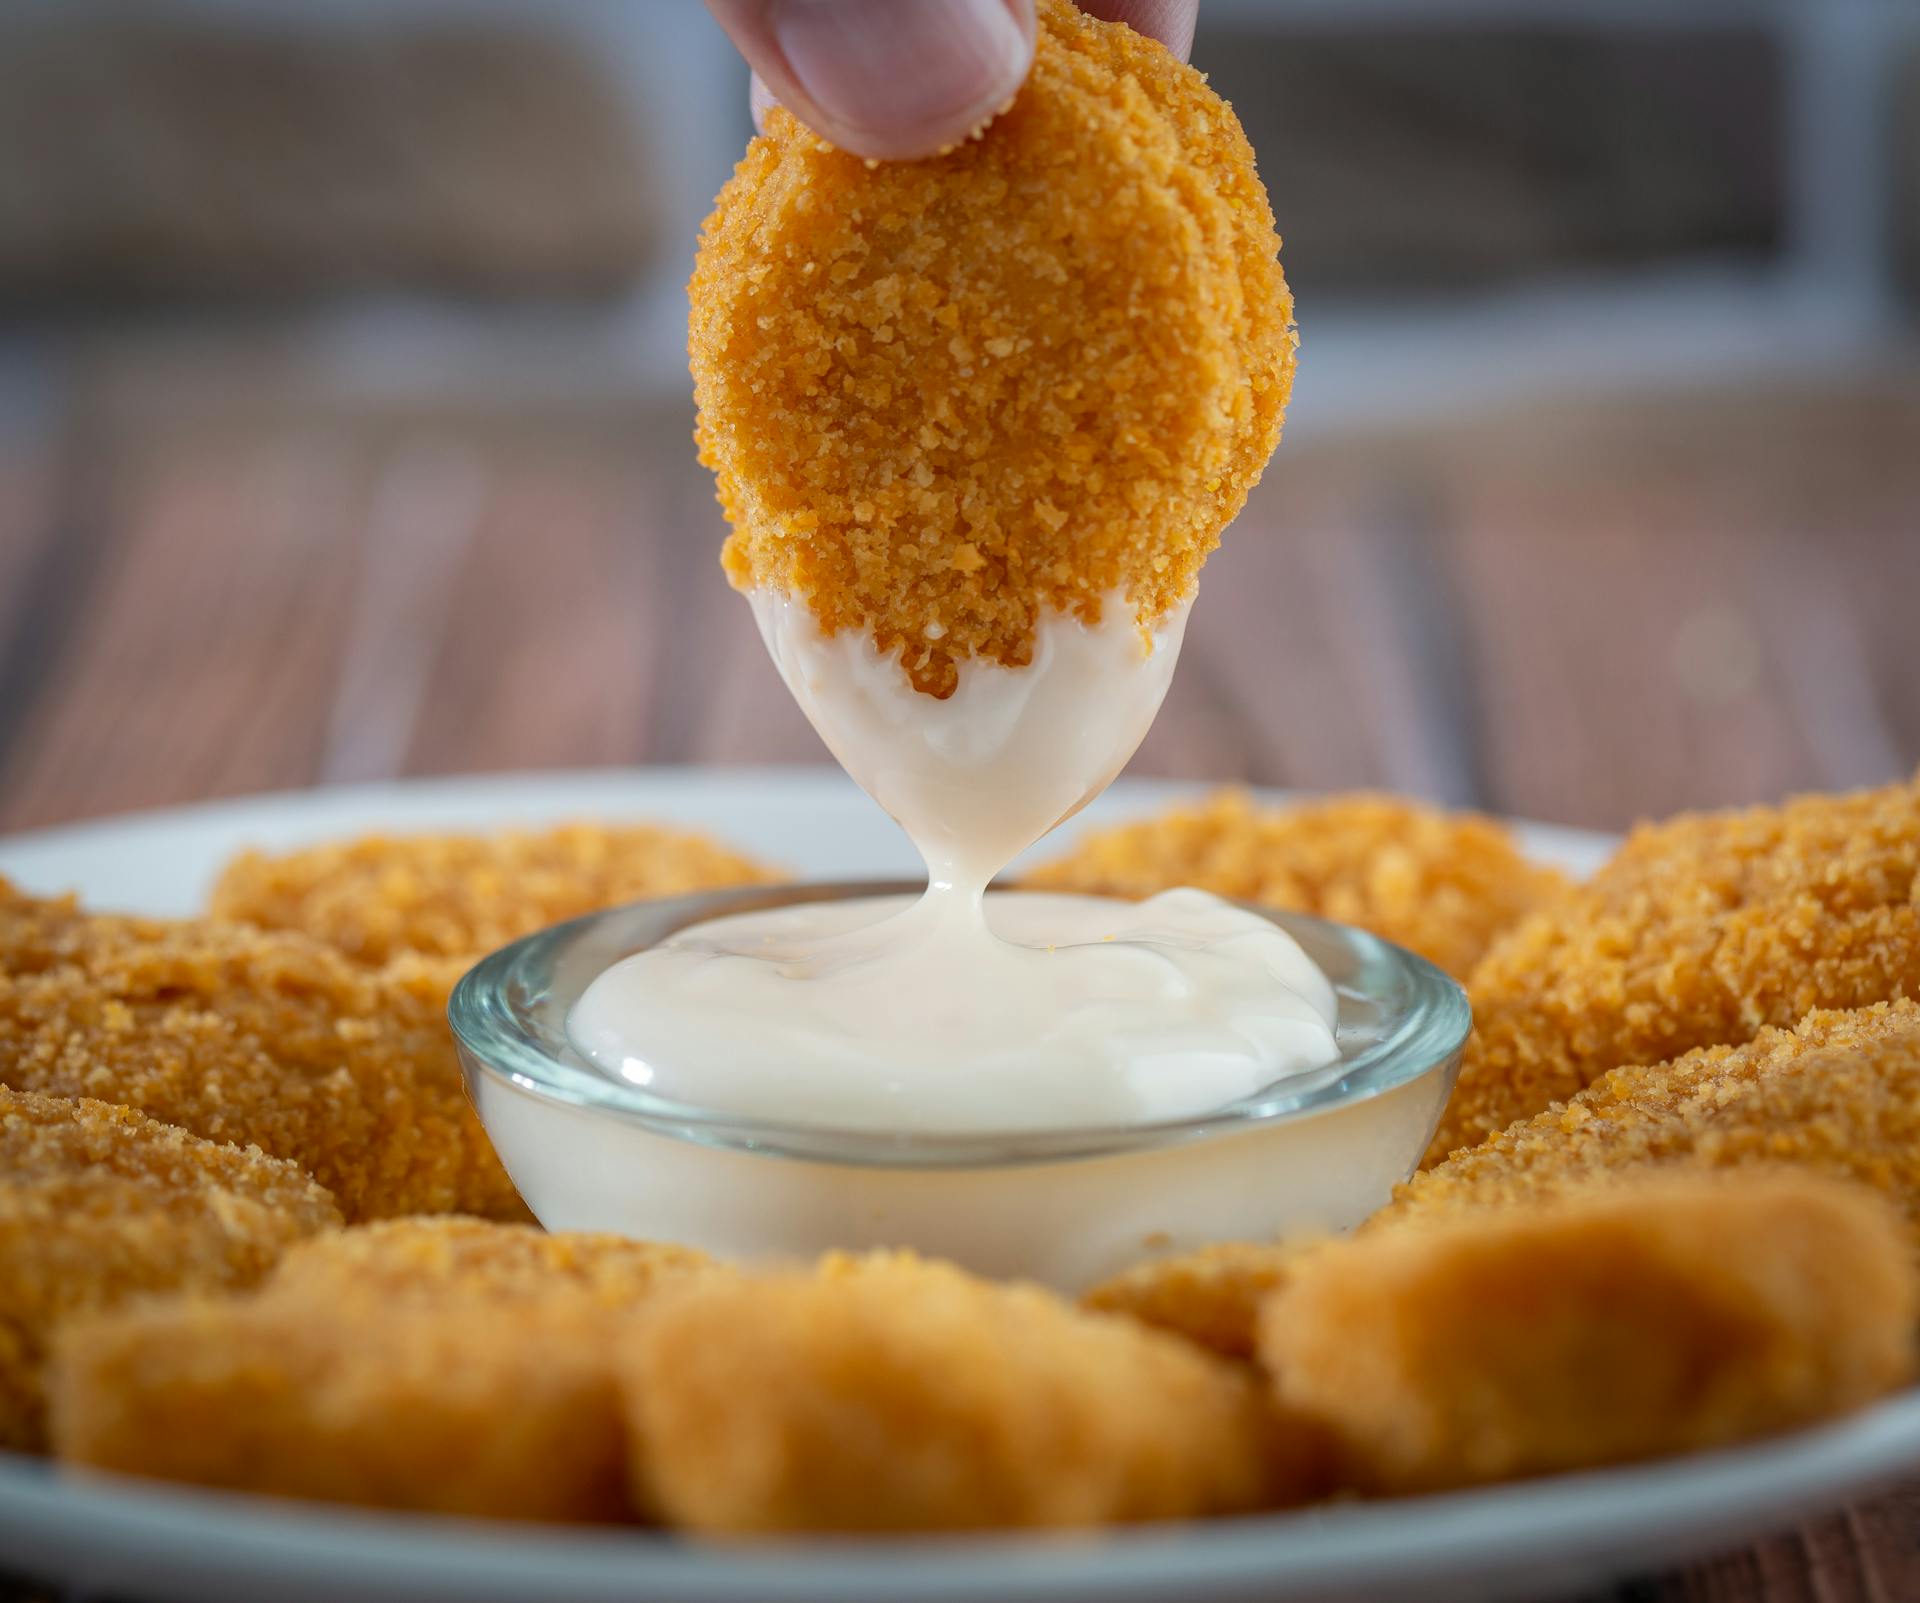 A person dipping a nugget in mayonnaise | Source: Pexels